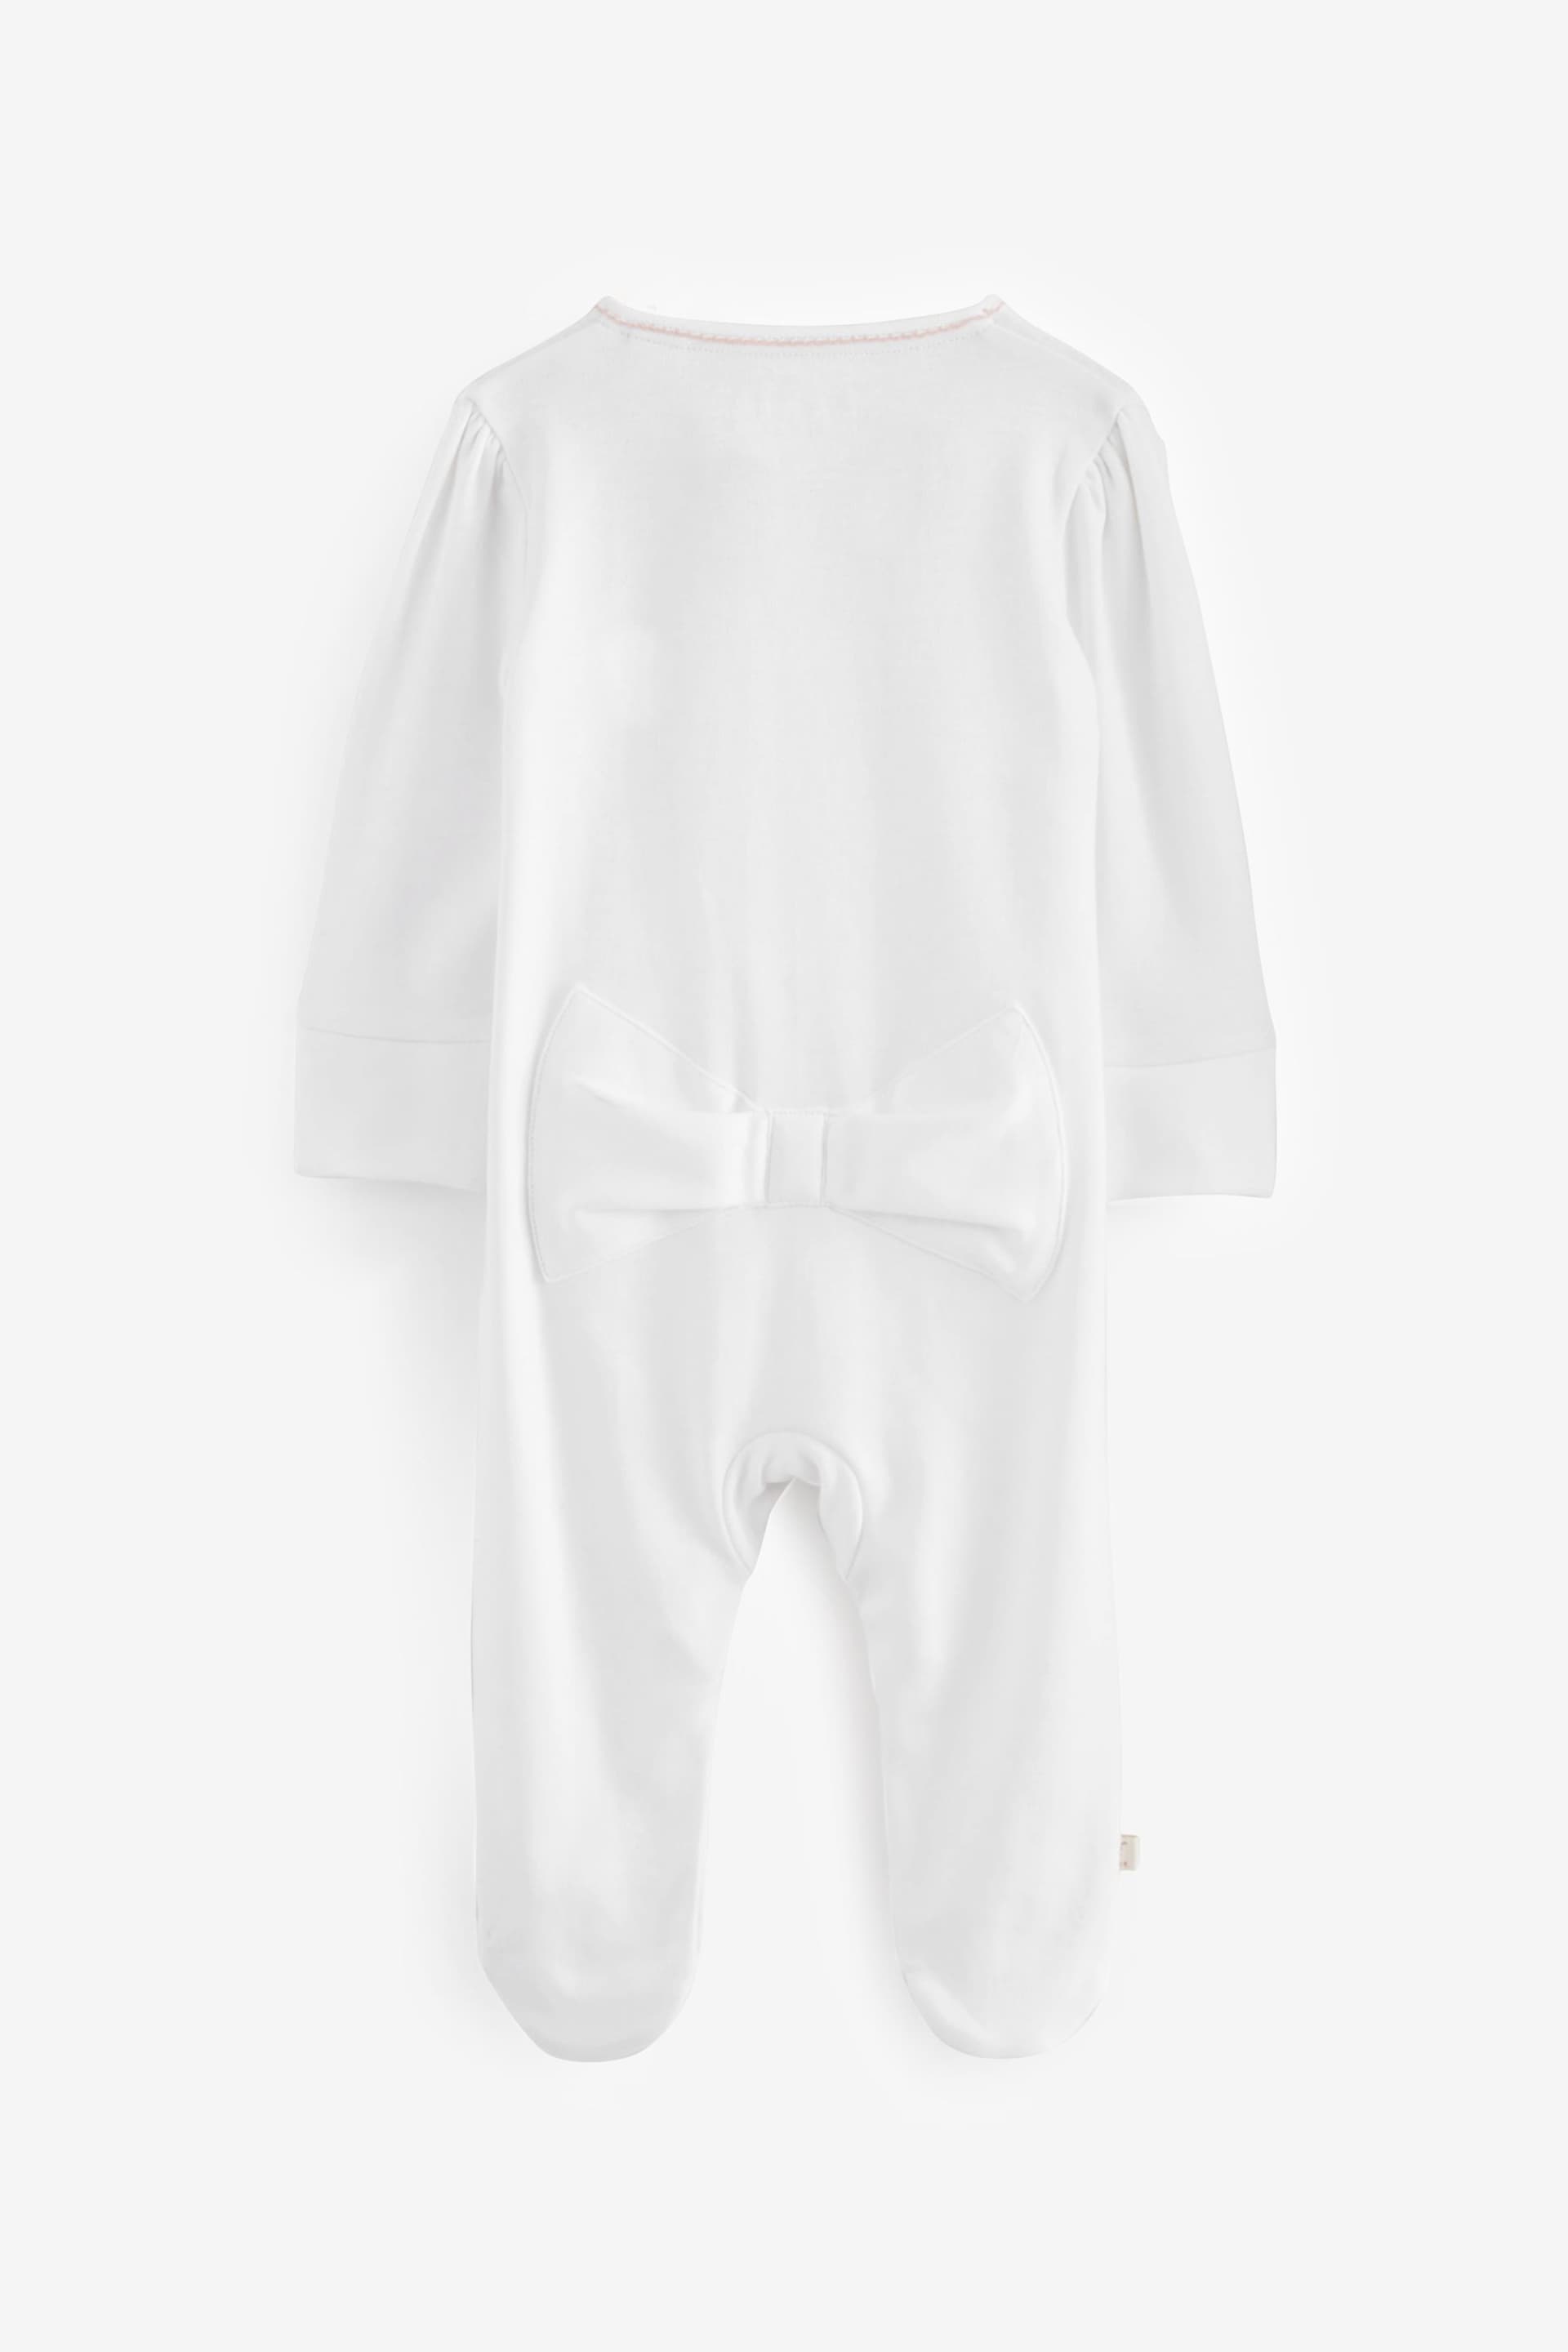 Baker by Ted Baker Babys First Eid Cotton White Sleepsuit - Image 3 of 7